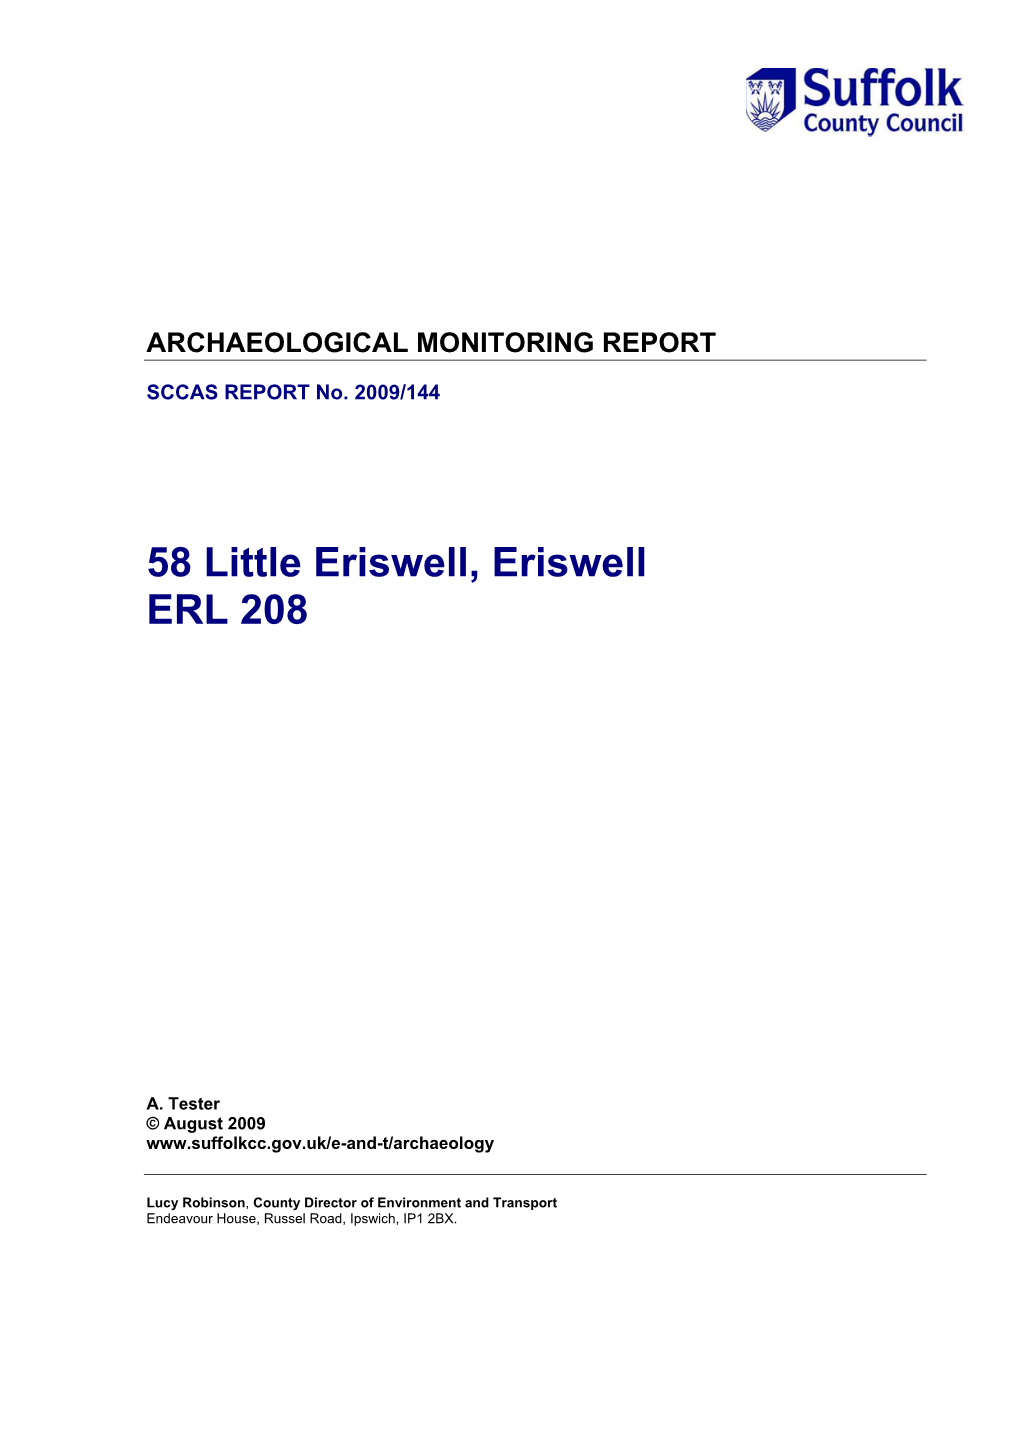 58 Little Eriswell, Eriswell ERL 208